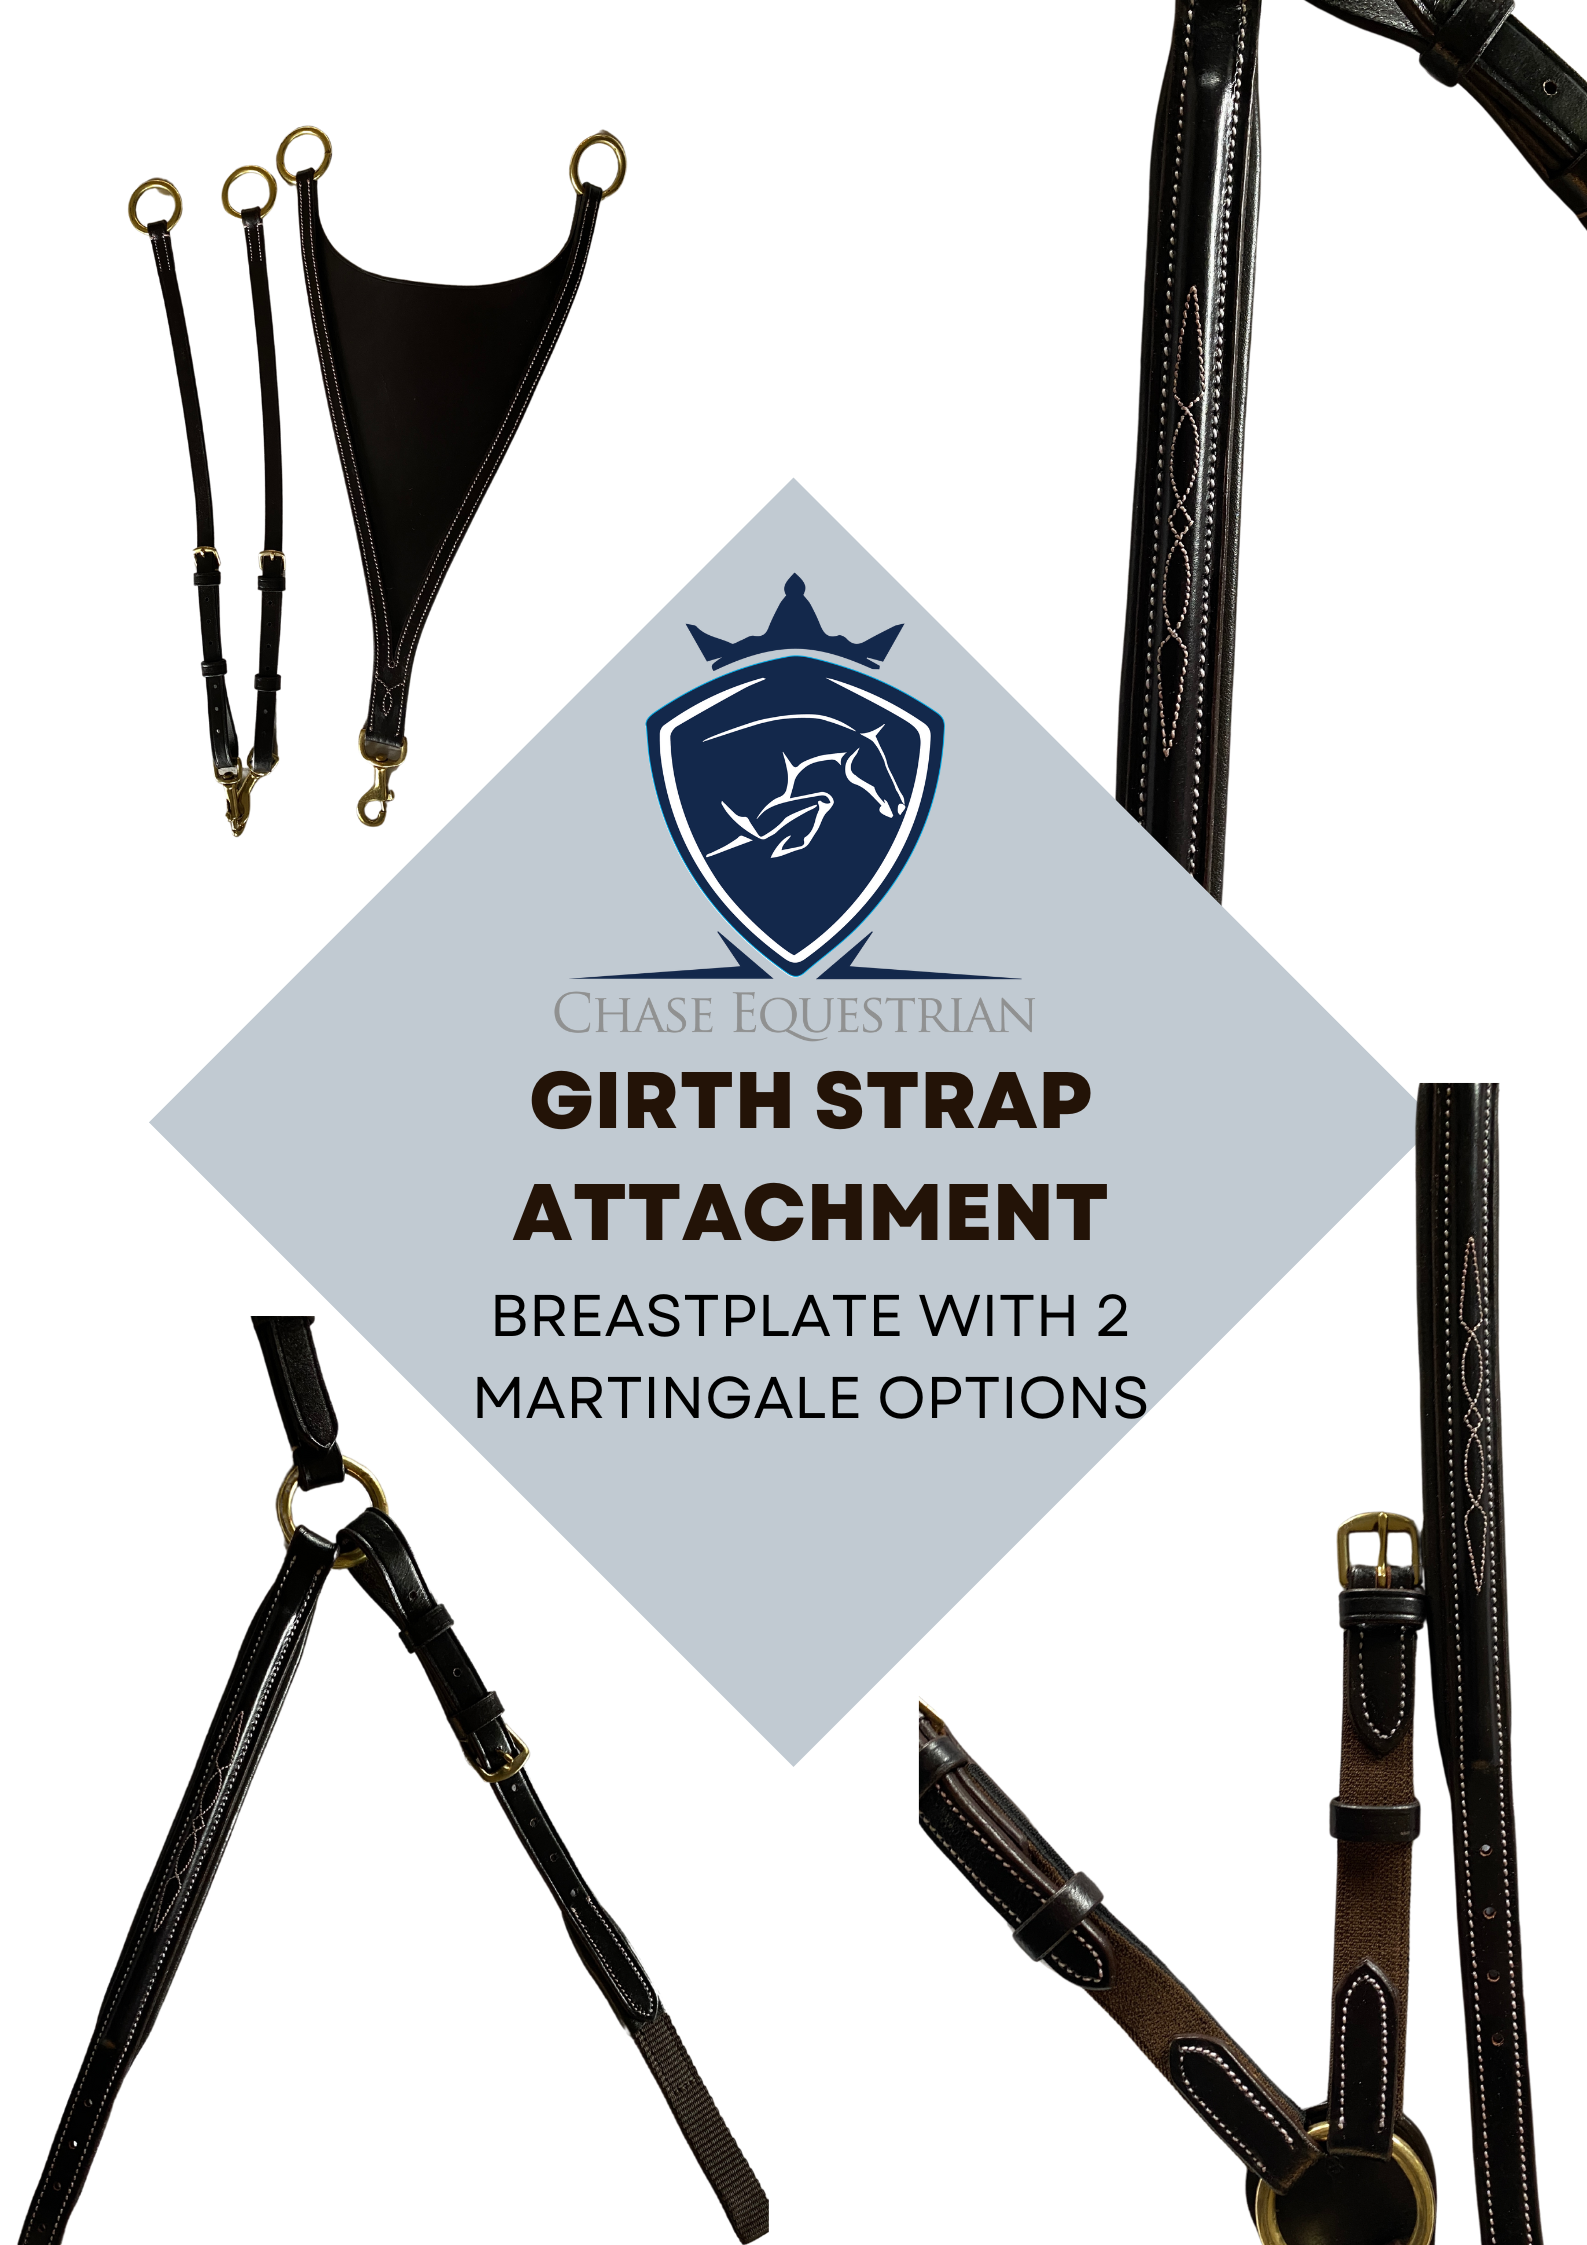 Breastplate (with both bib ring and normal martingale attachment options inc.)